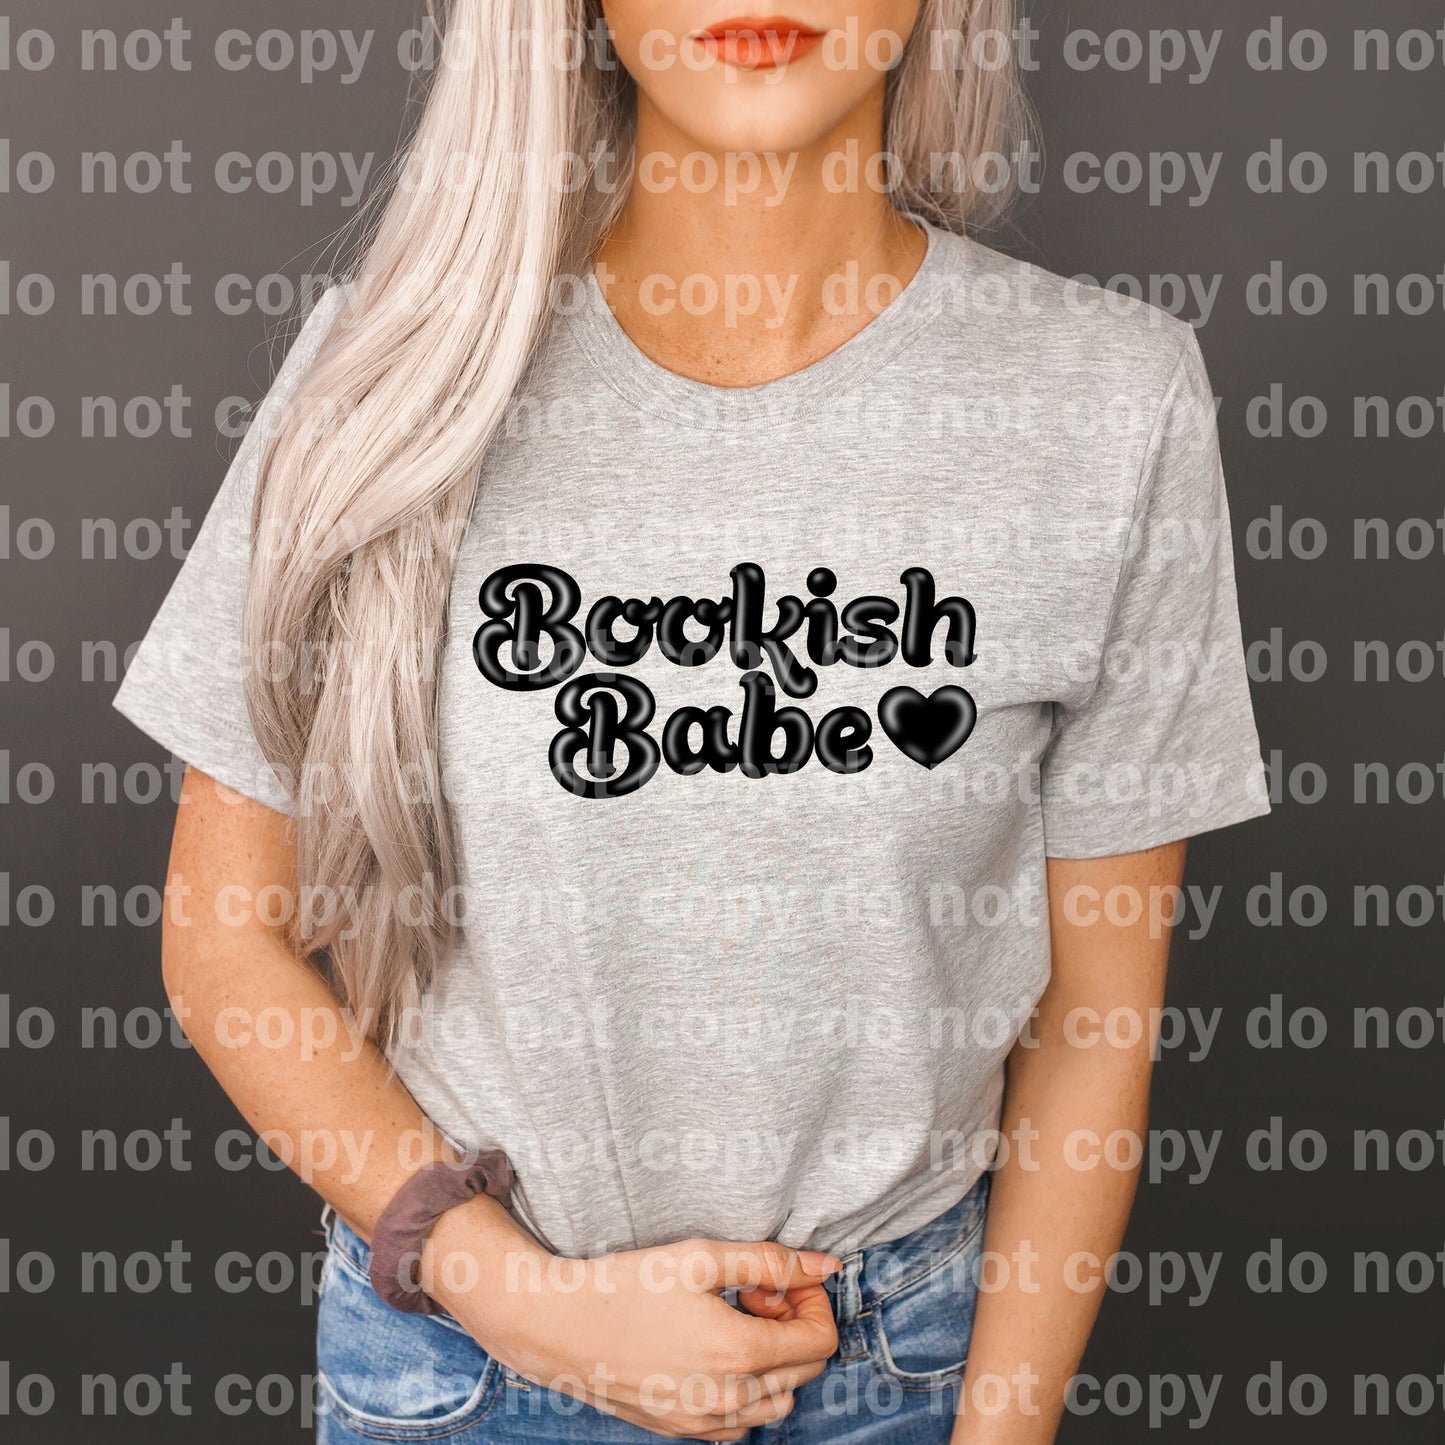 Bookish Babe Black/Pink Dream Print or Sublimation Print